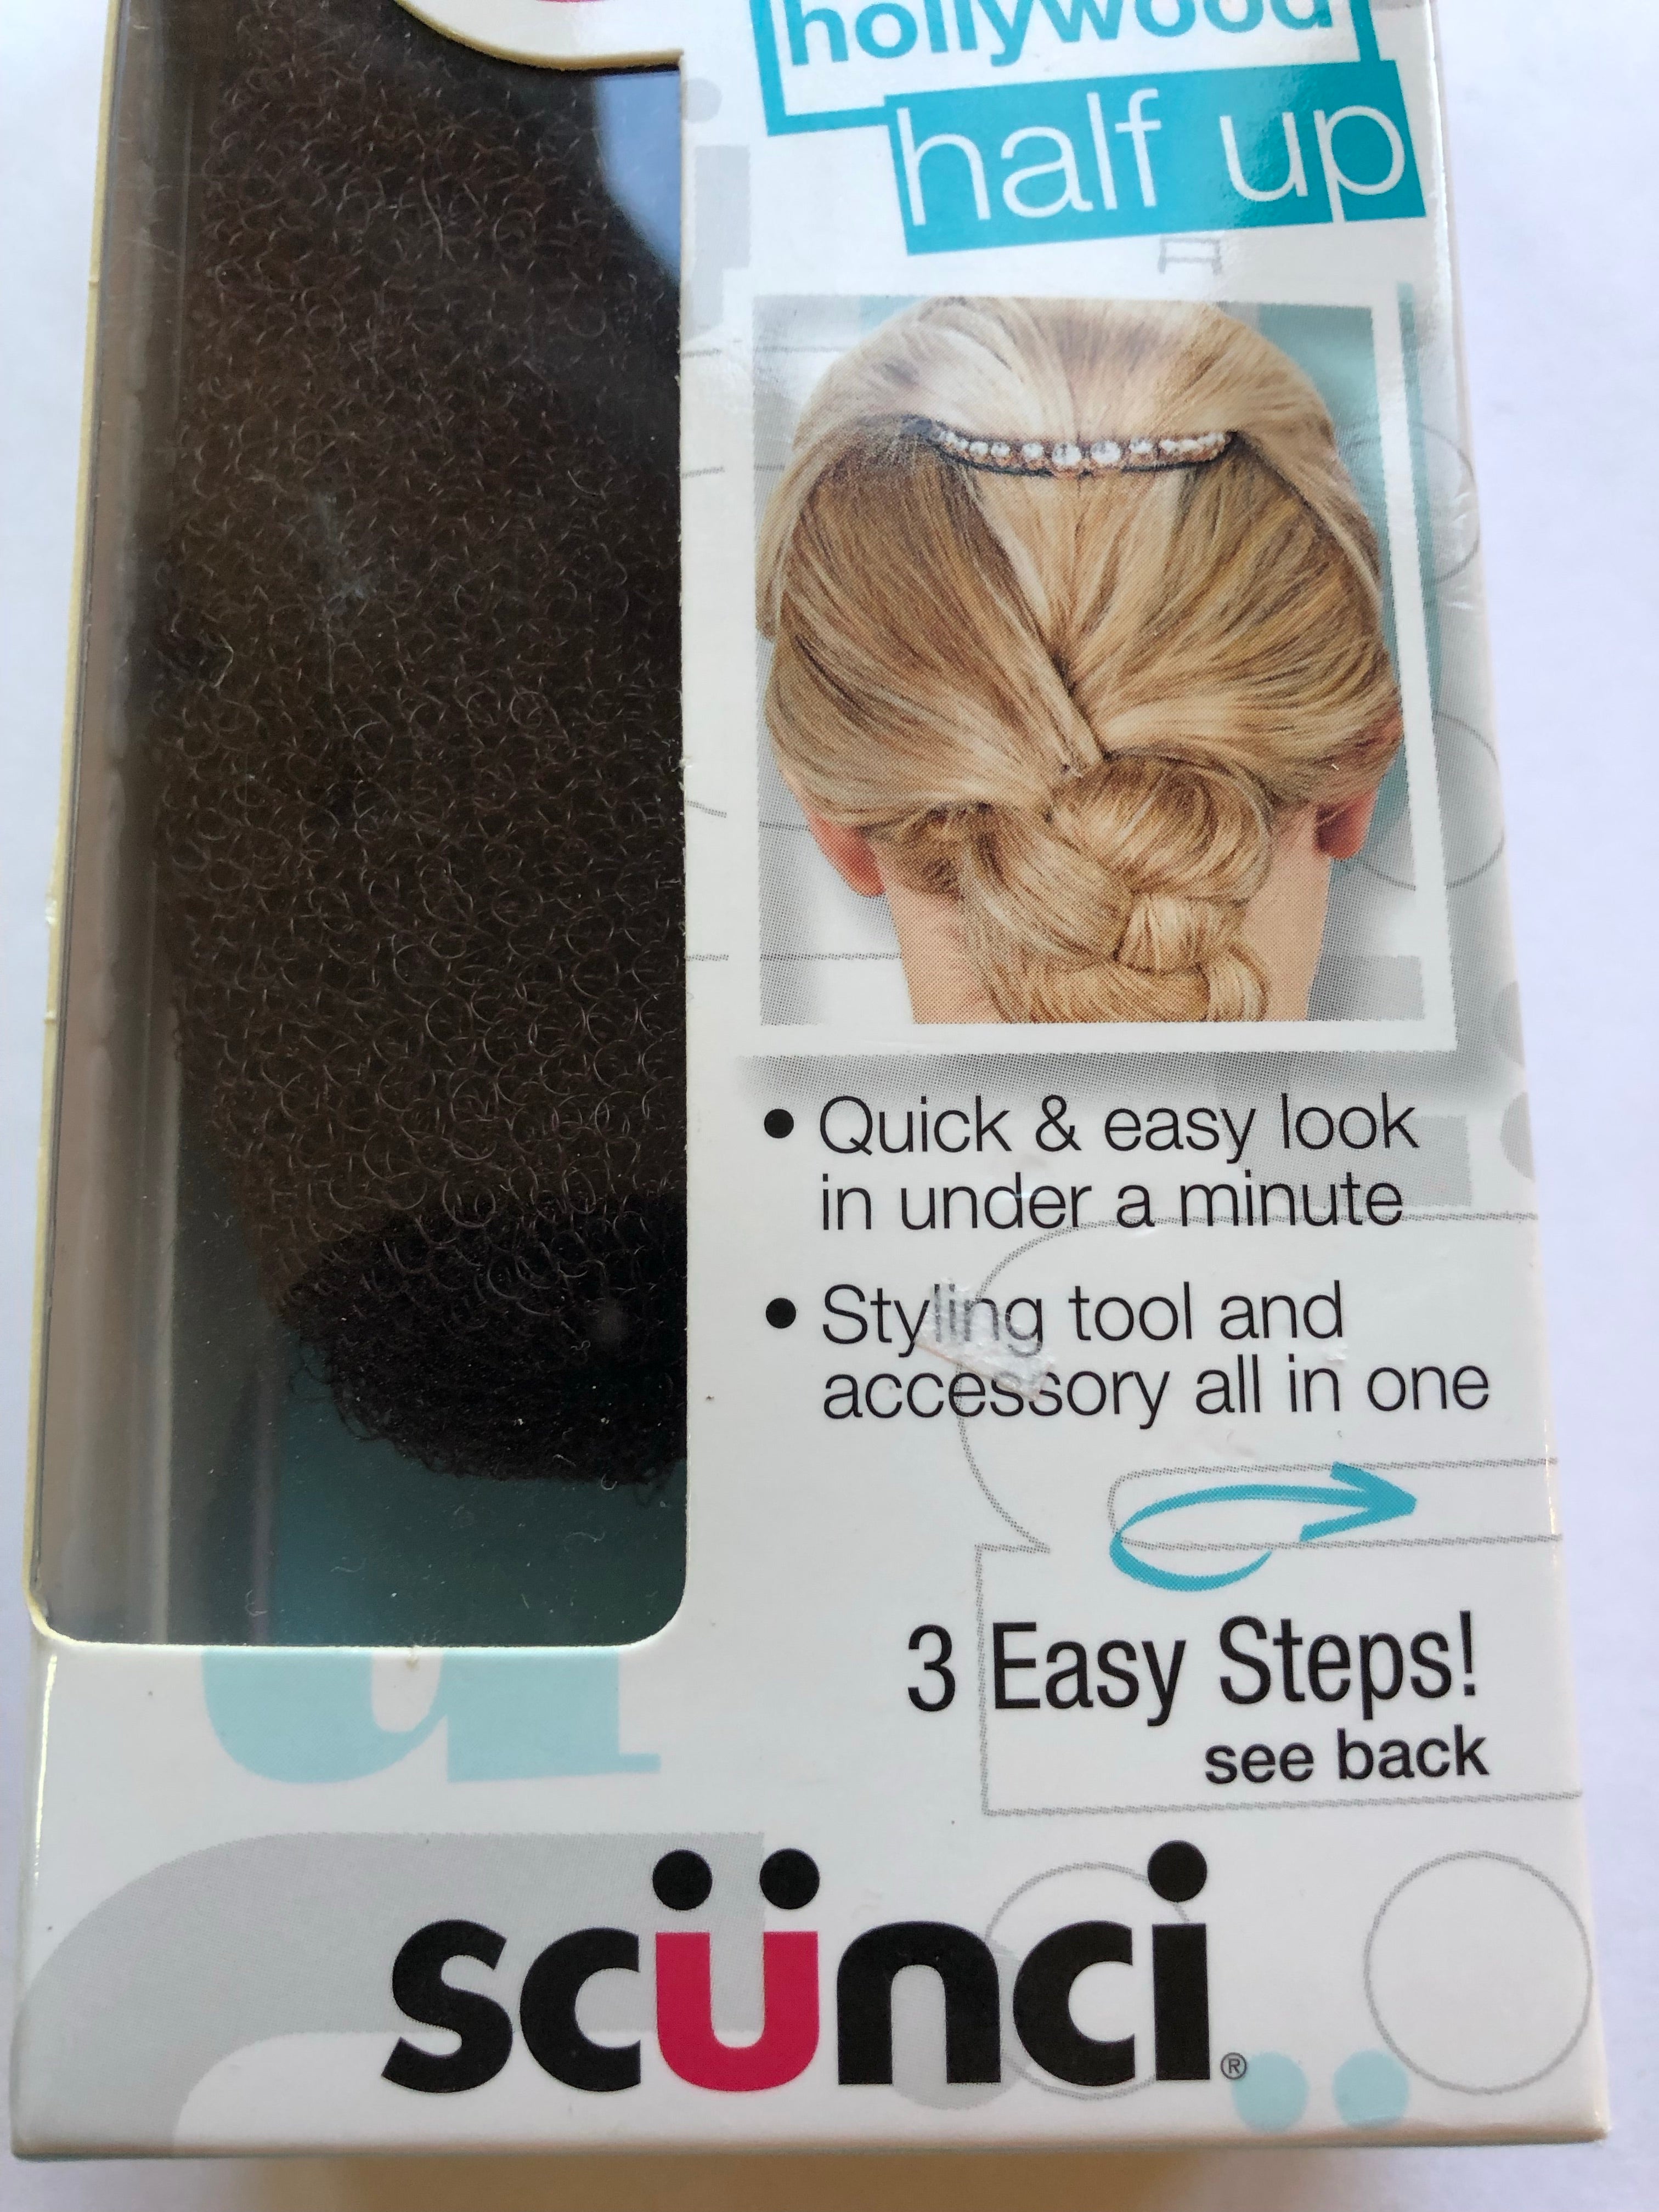 Scunci Hollywood Half Up Quick Easy Styling Tool Accessory 20852-A 1 Piece